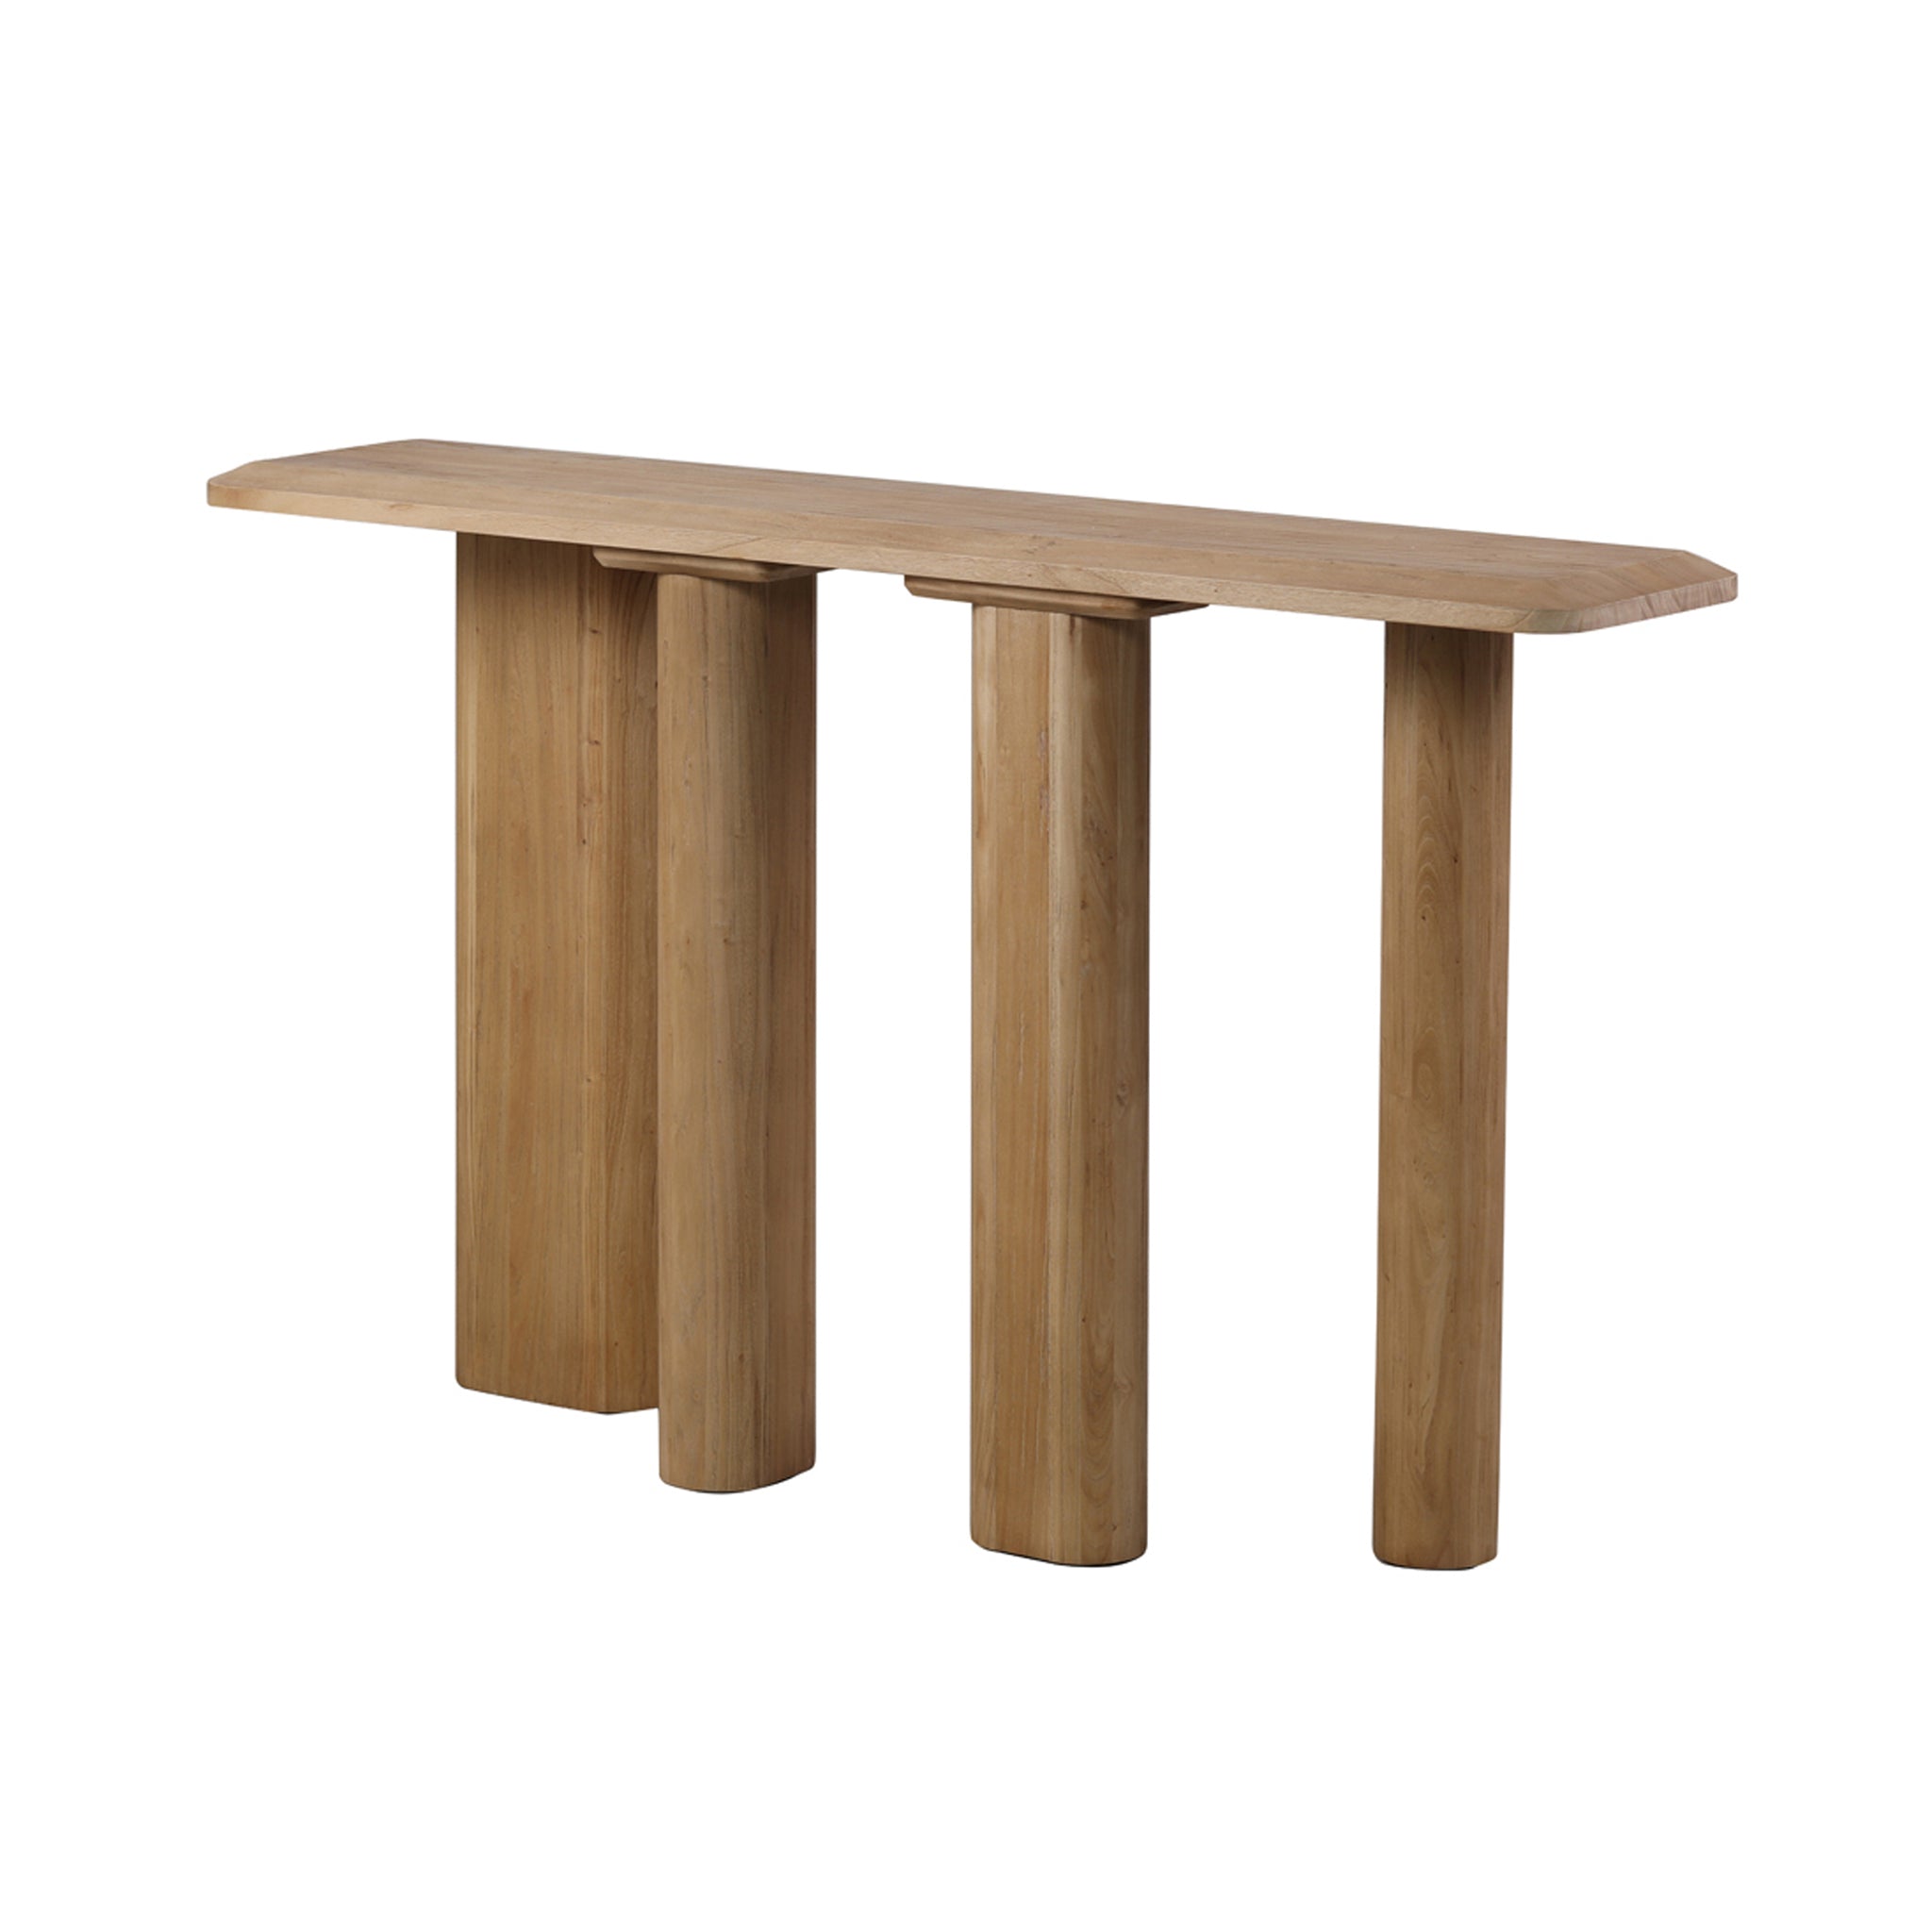 Layla 1.6m Wooden Console Table - Natural - Console